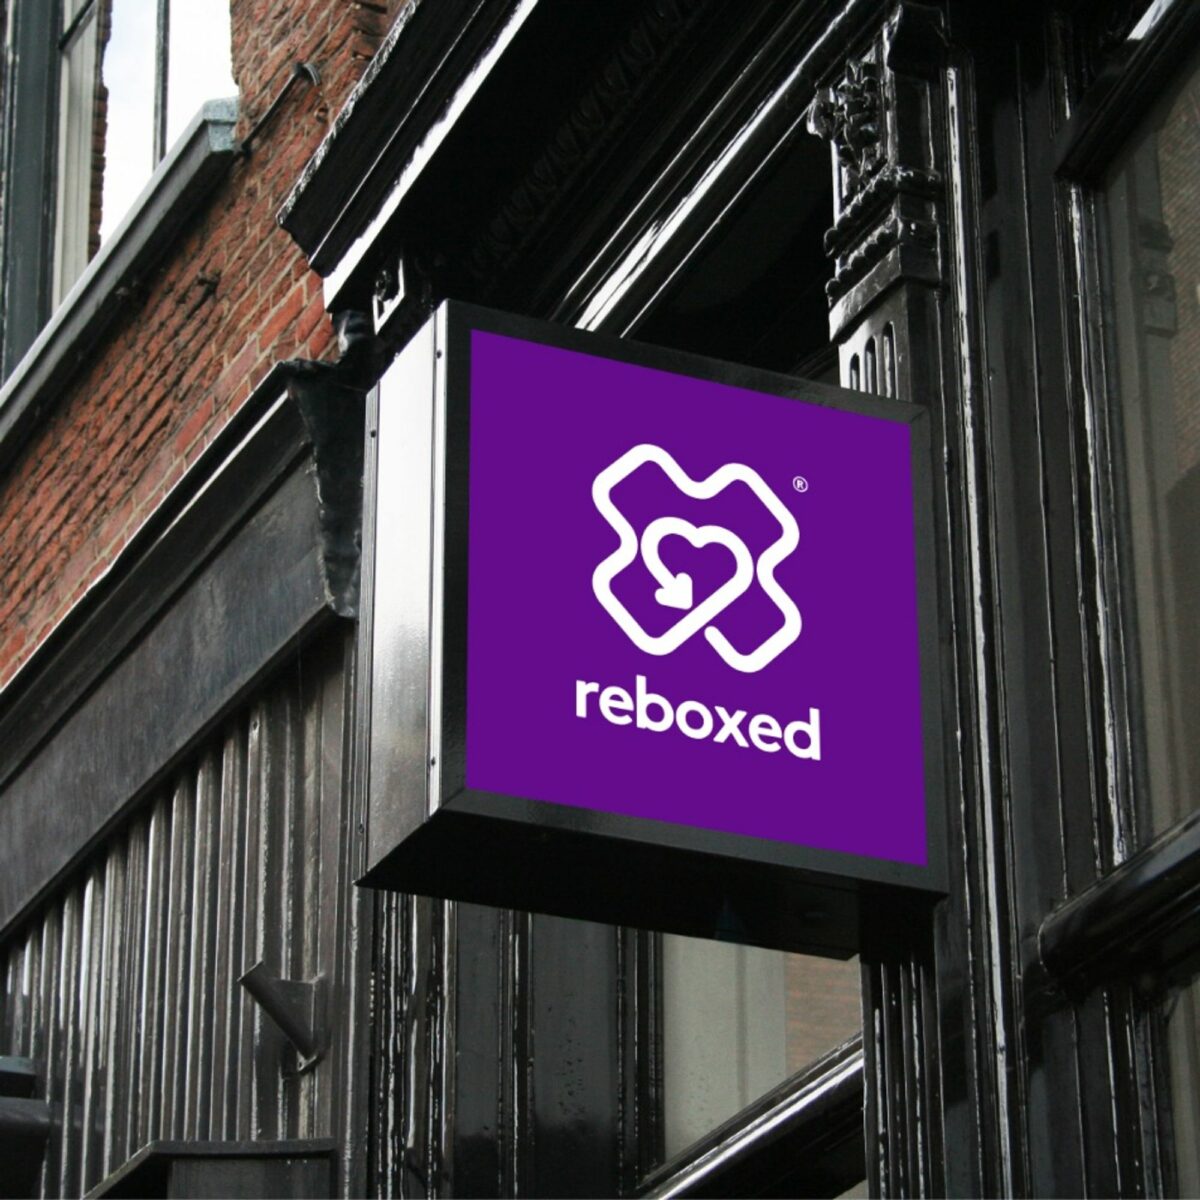 Reboxed logo: Sustainable tech retailer Reboxed has secured £1.6m of seed funding to grow its business selling refurbished electronics and help combat e-waste.